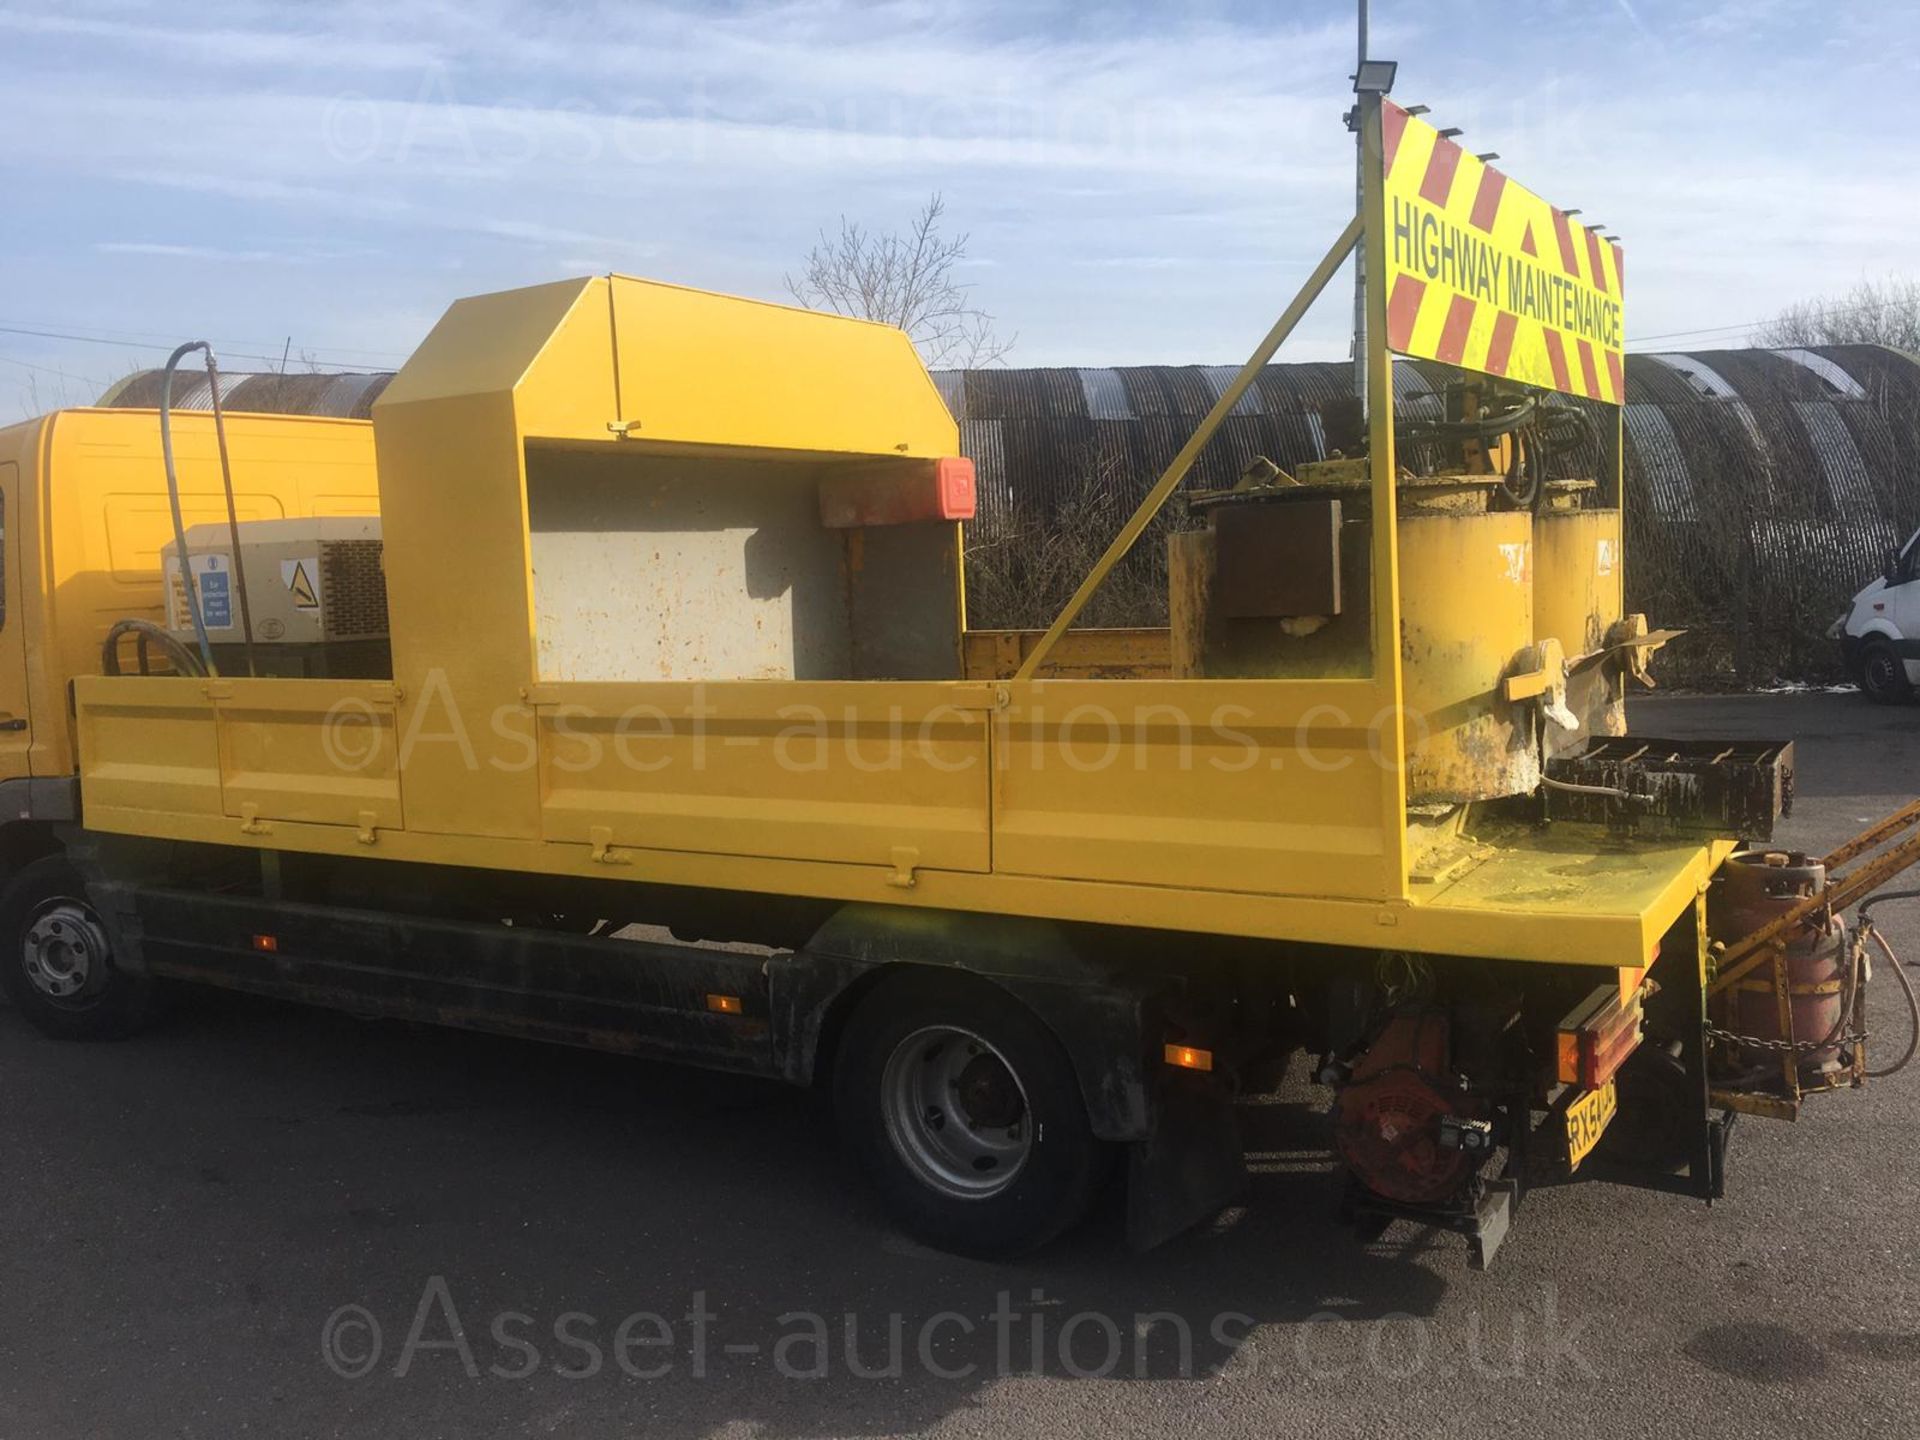 2004/54 REG MERCEDES ATEGO 1018 DAY YELLOW DROPSIDE LINE PAINTING LORRY 4.3L DIESEL ENGINE *NO VAT* - Image 10 of 128